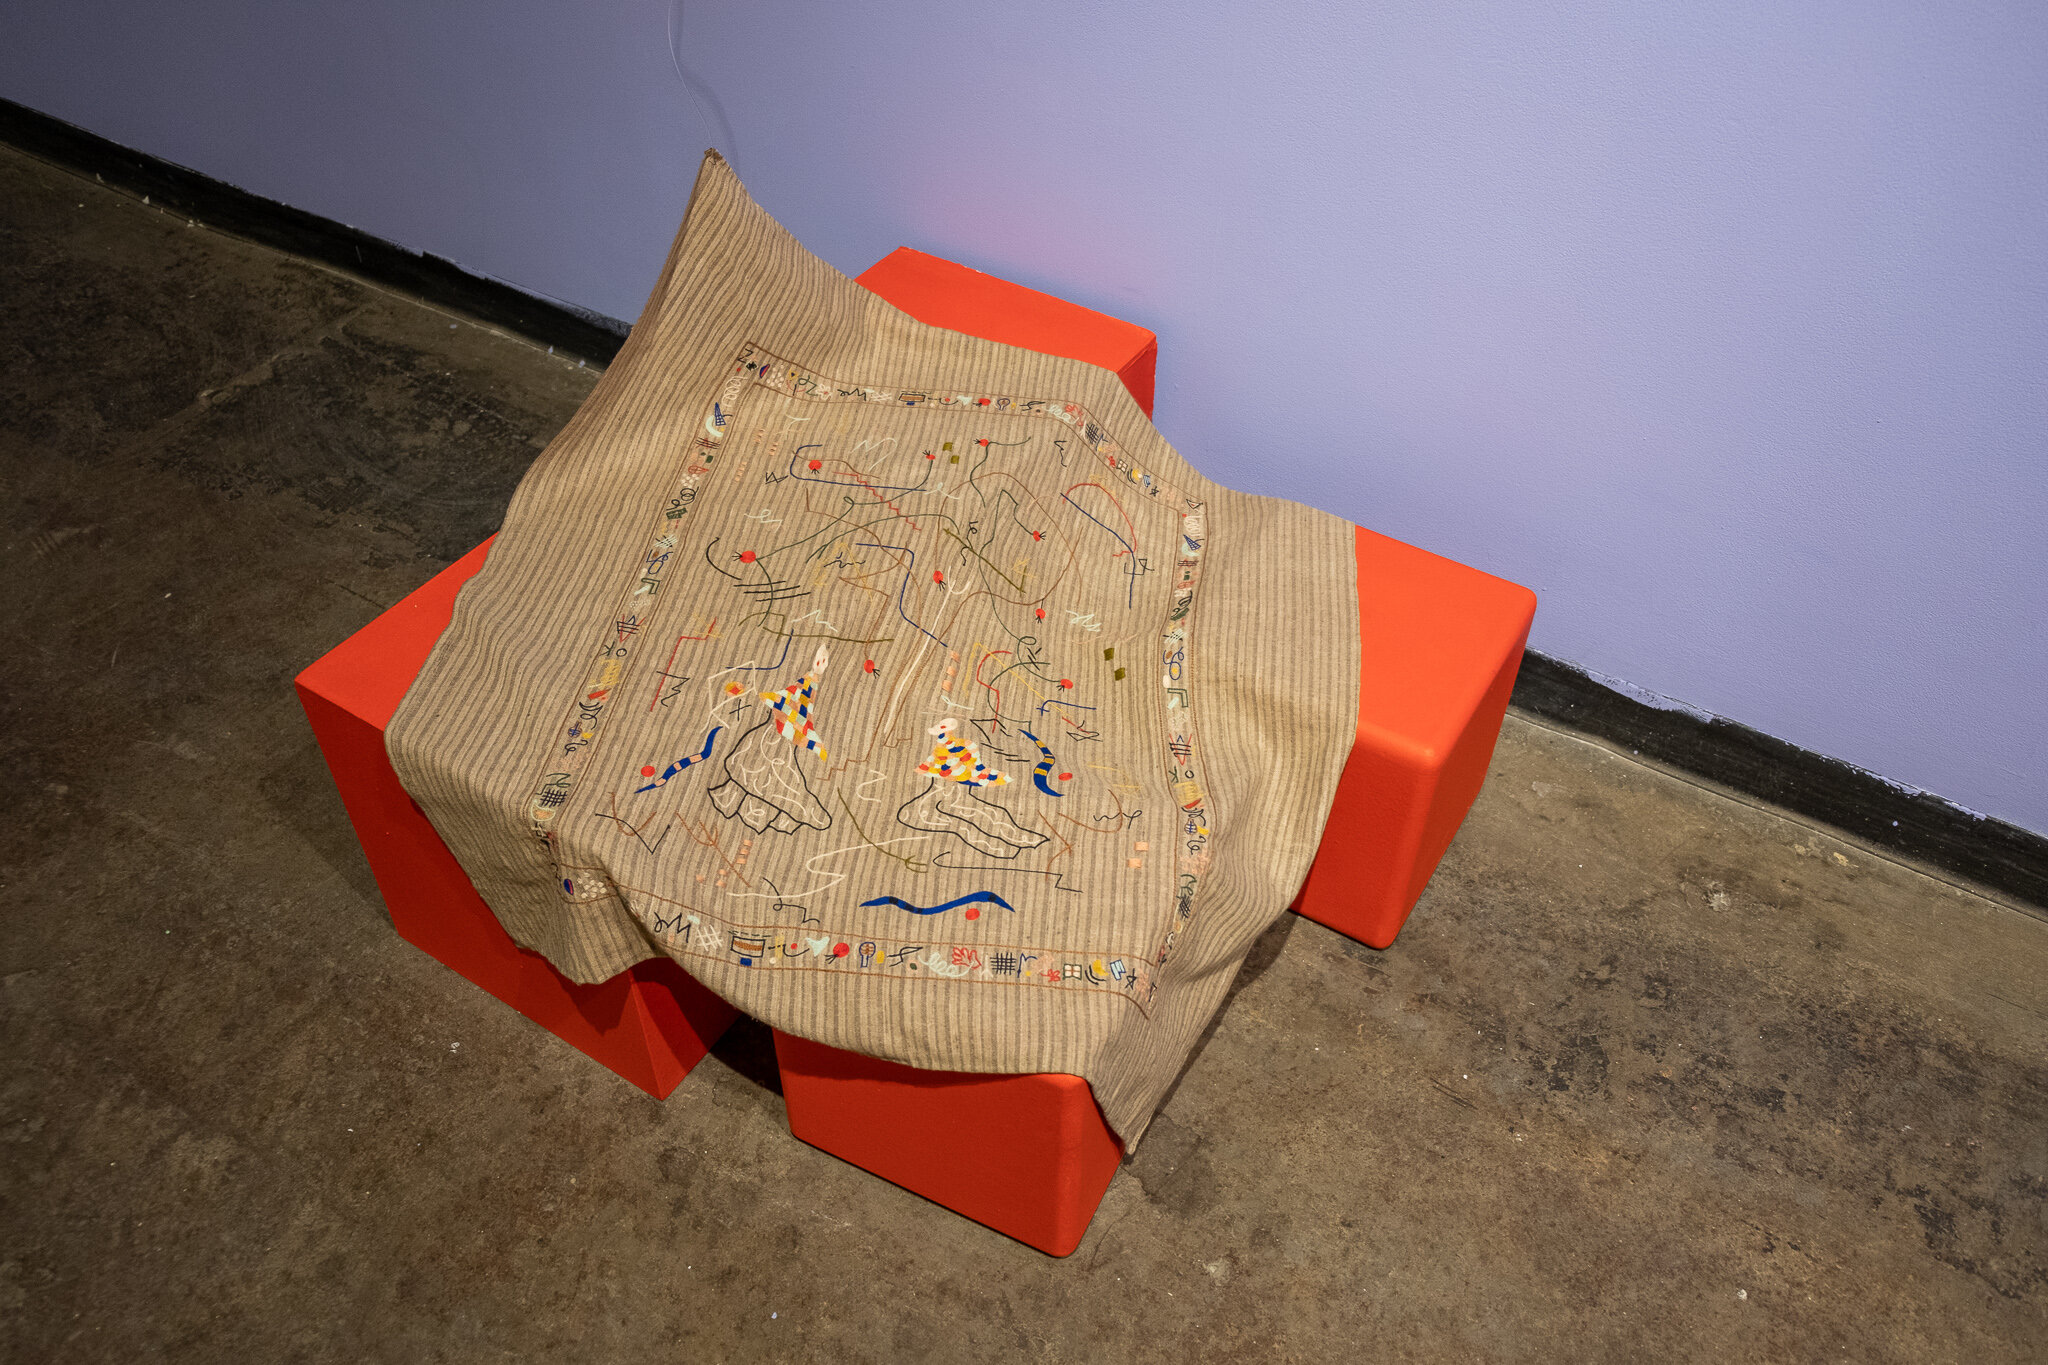  This is a brown and tan striped piece of fabric that is laid across three bright red plinths, two of them being small cubes and one of them being a rectangular box. On the fabric there is embroidery work, consisting mostly of curved, abstract lines 